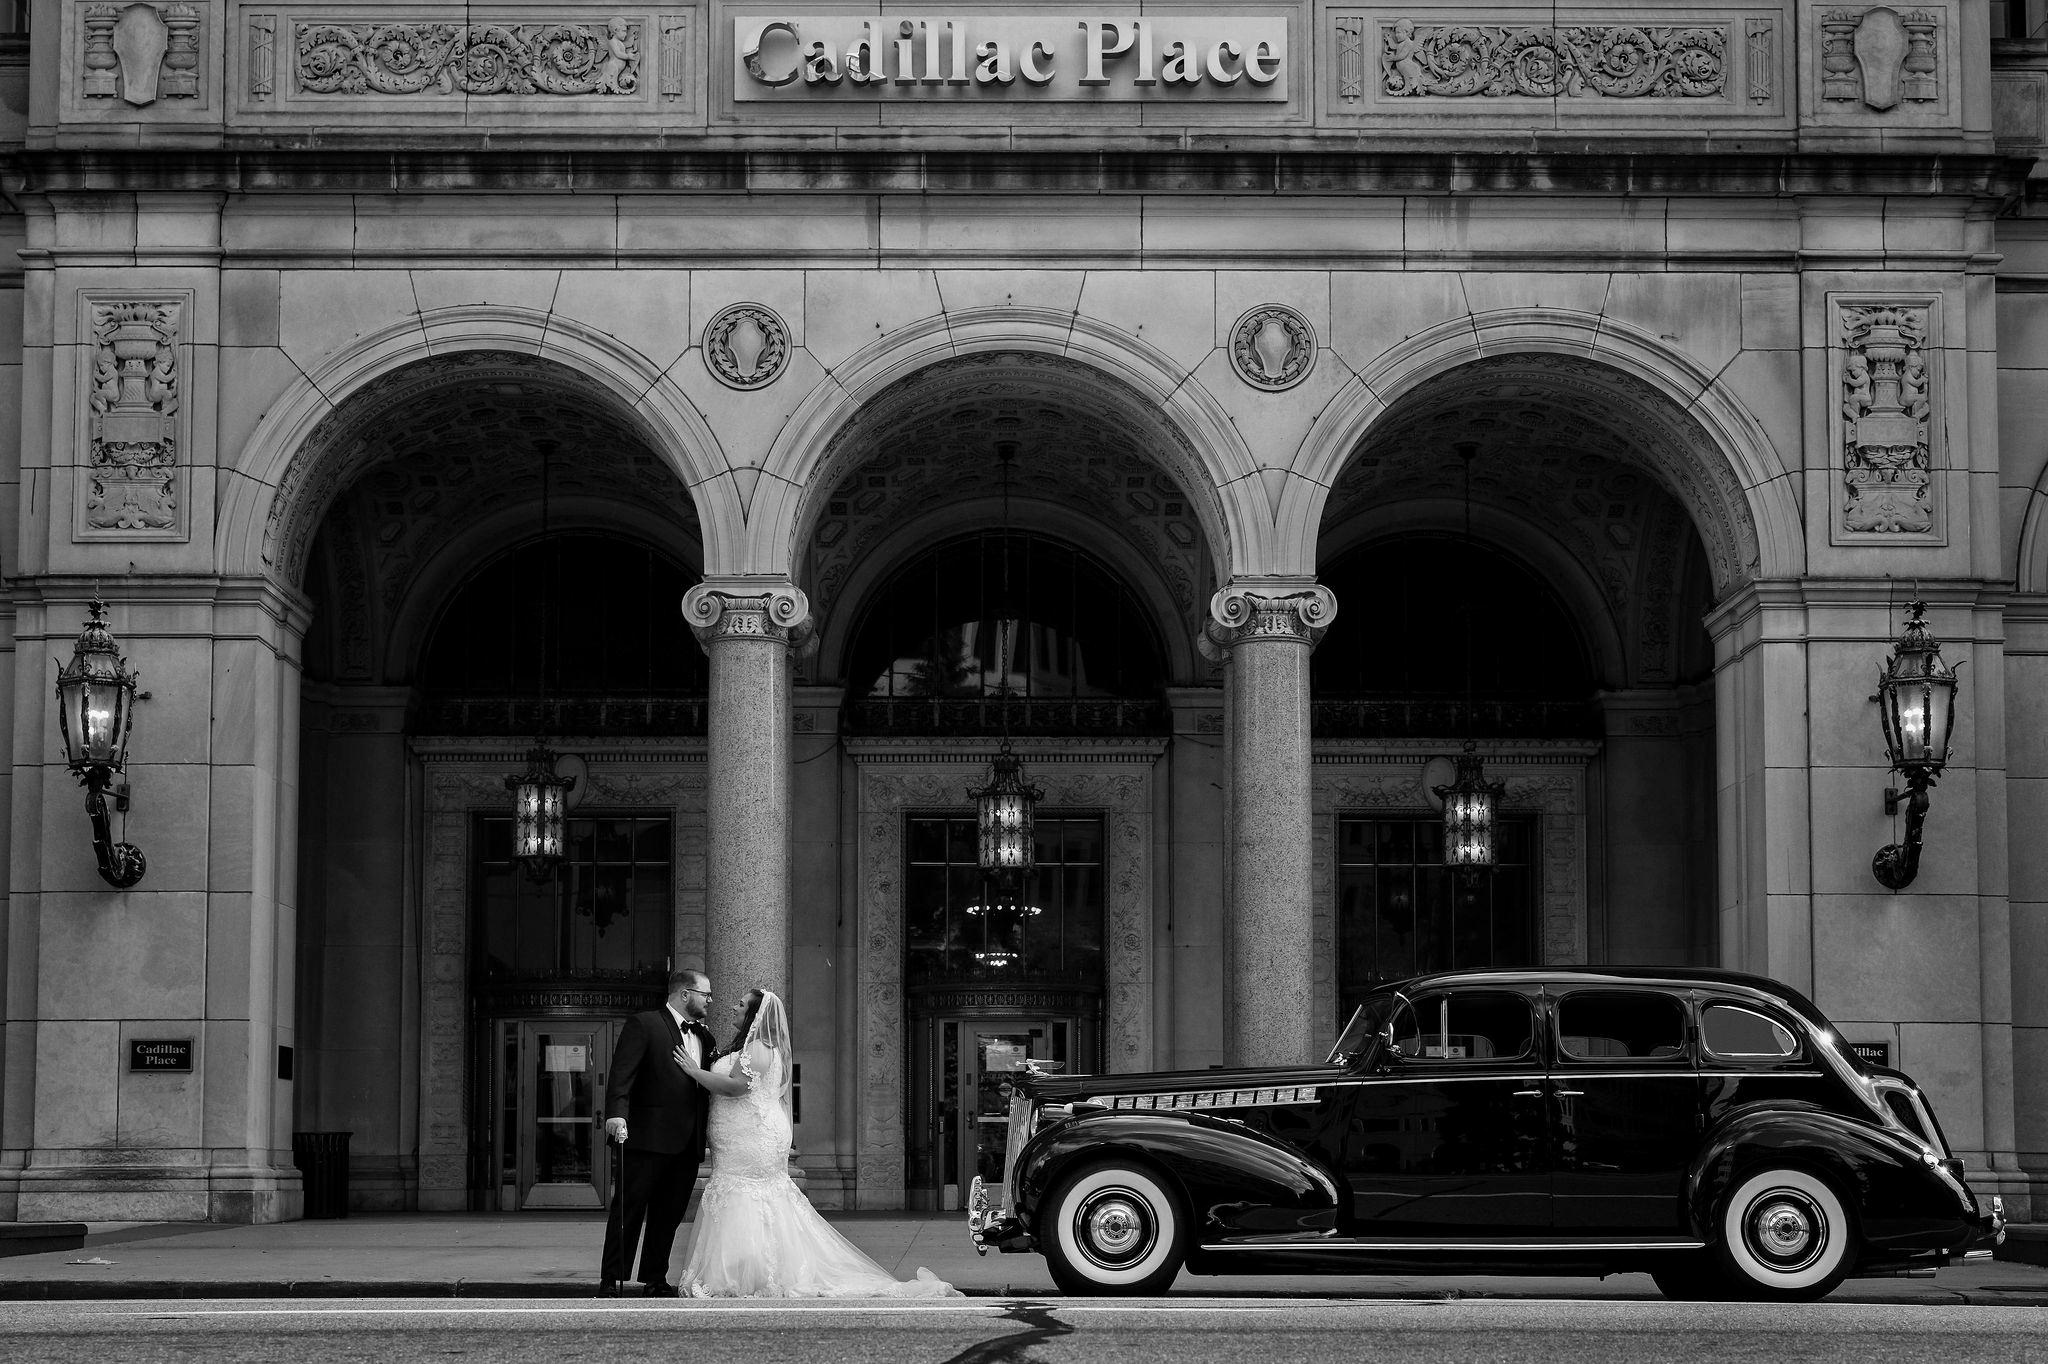 A couple poses with a classic car on the streets of Detroit in front of Cadillac Place Apartments.